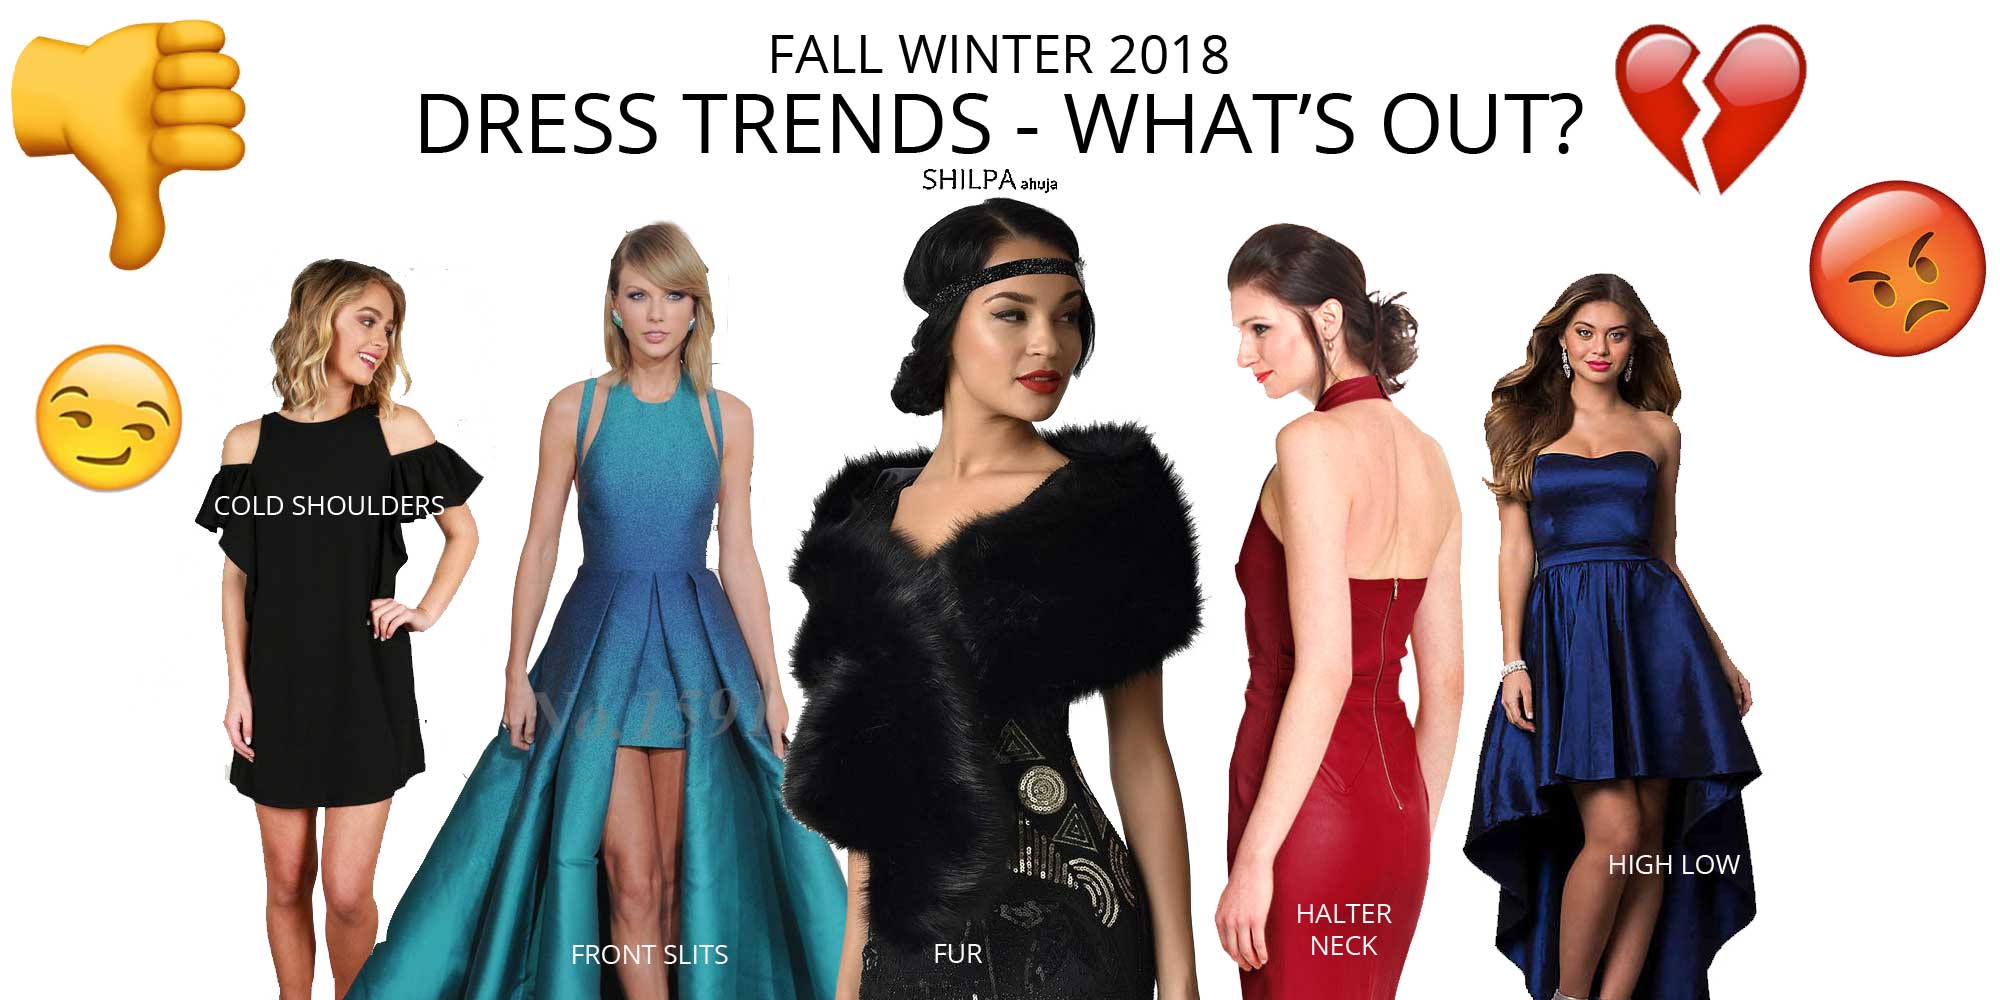 dress-trends-whats-out-fall-winter-2018-fw18-cold-shoulders-frontslit